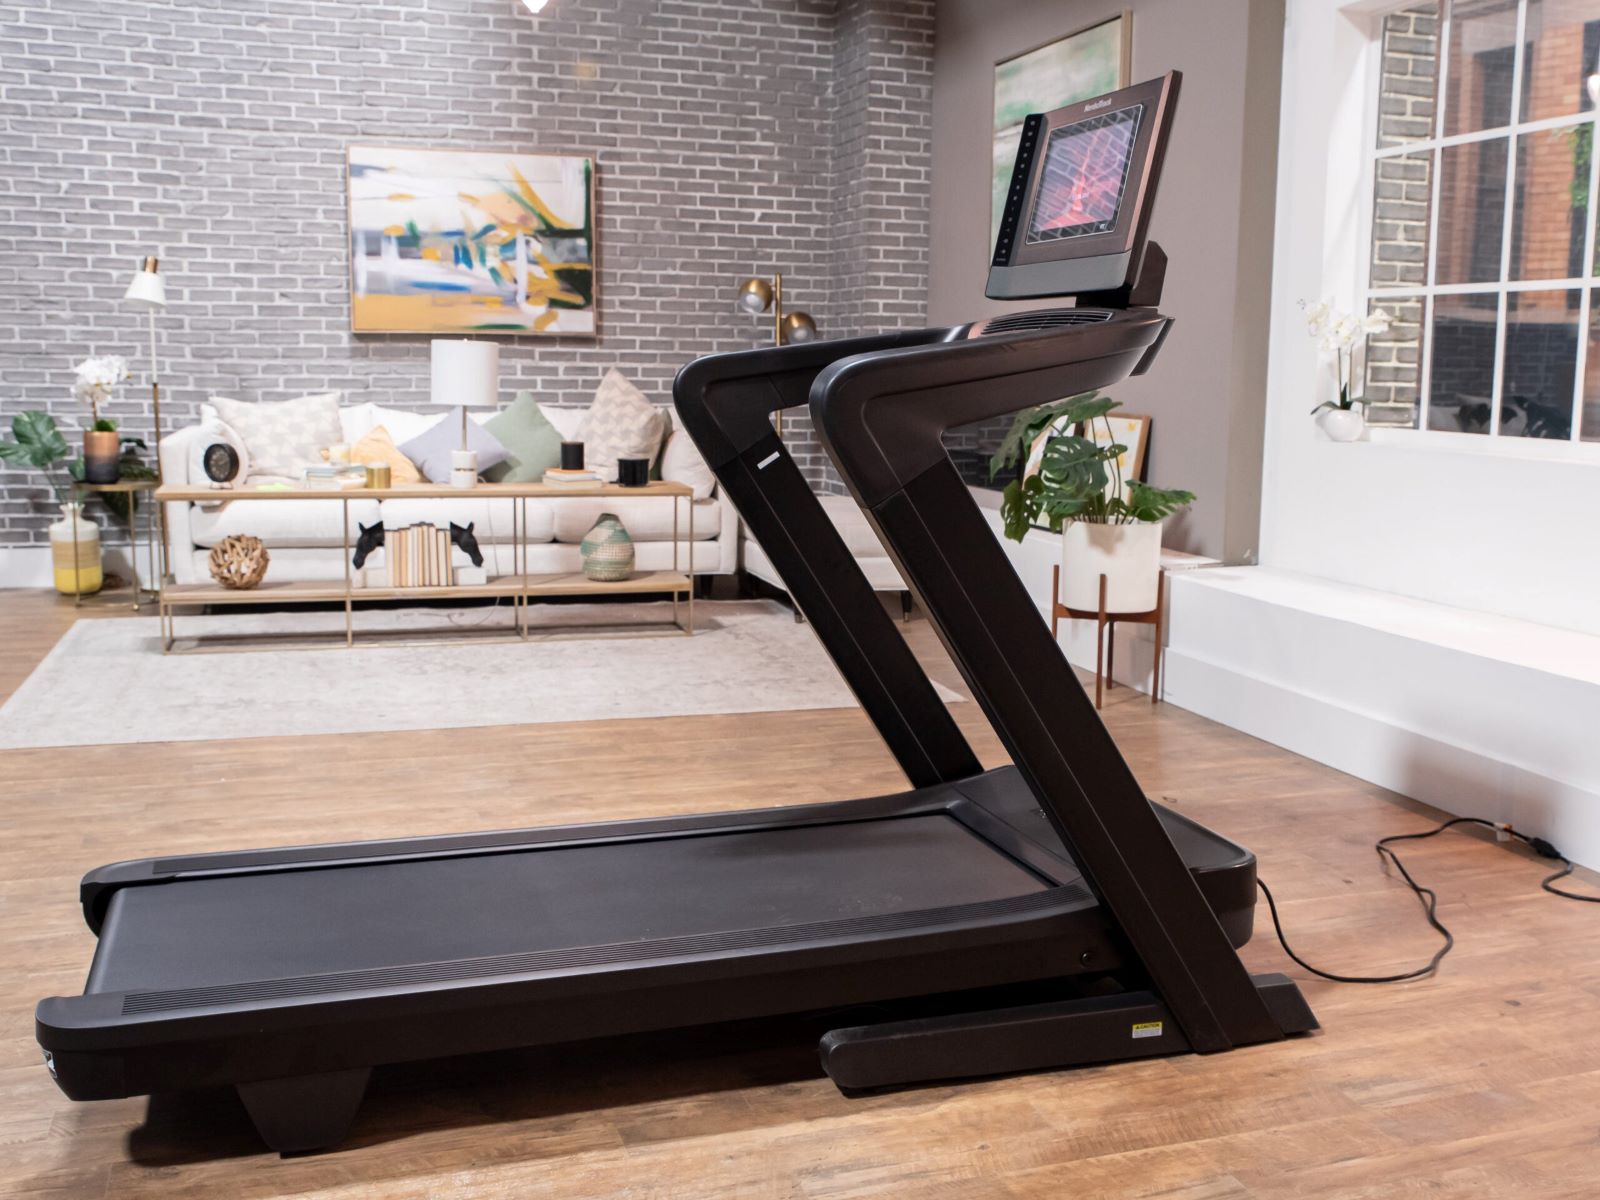 How To Fold A NordicTrack Treadmill